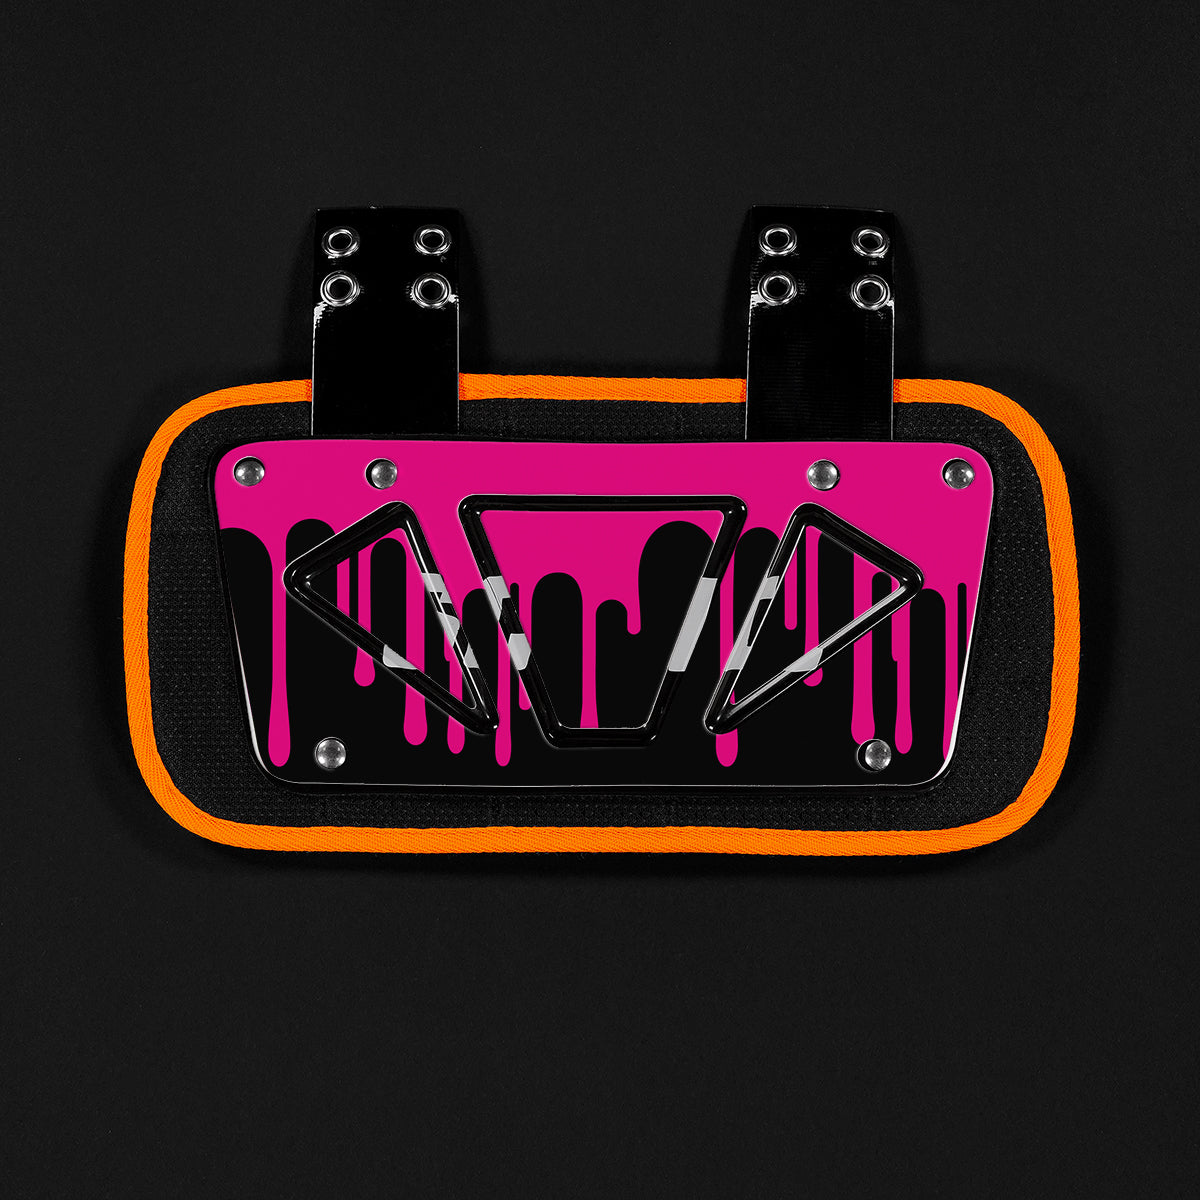 Dripping Pink Sticker for Back Plate